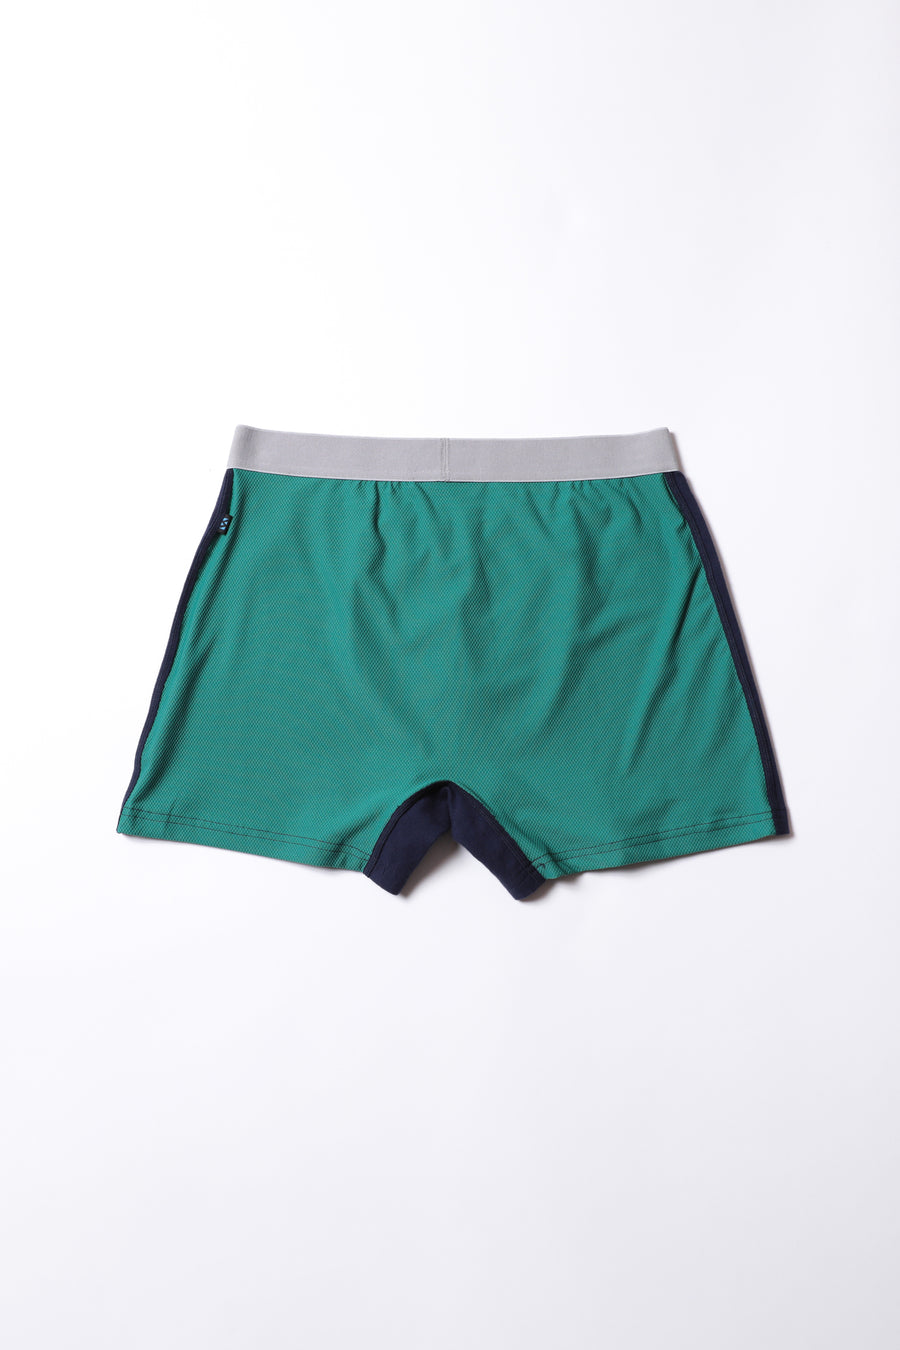 Hybrid wear BOXER（Cotton×Mesh）Navy×Green [New Color]